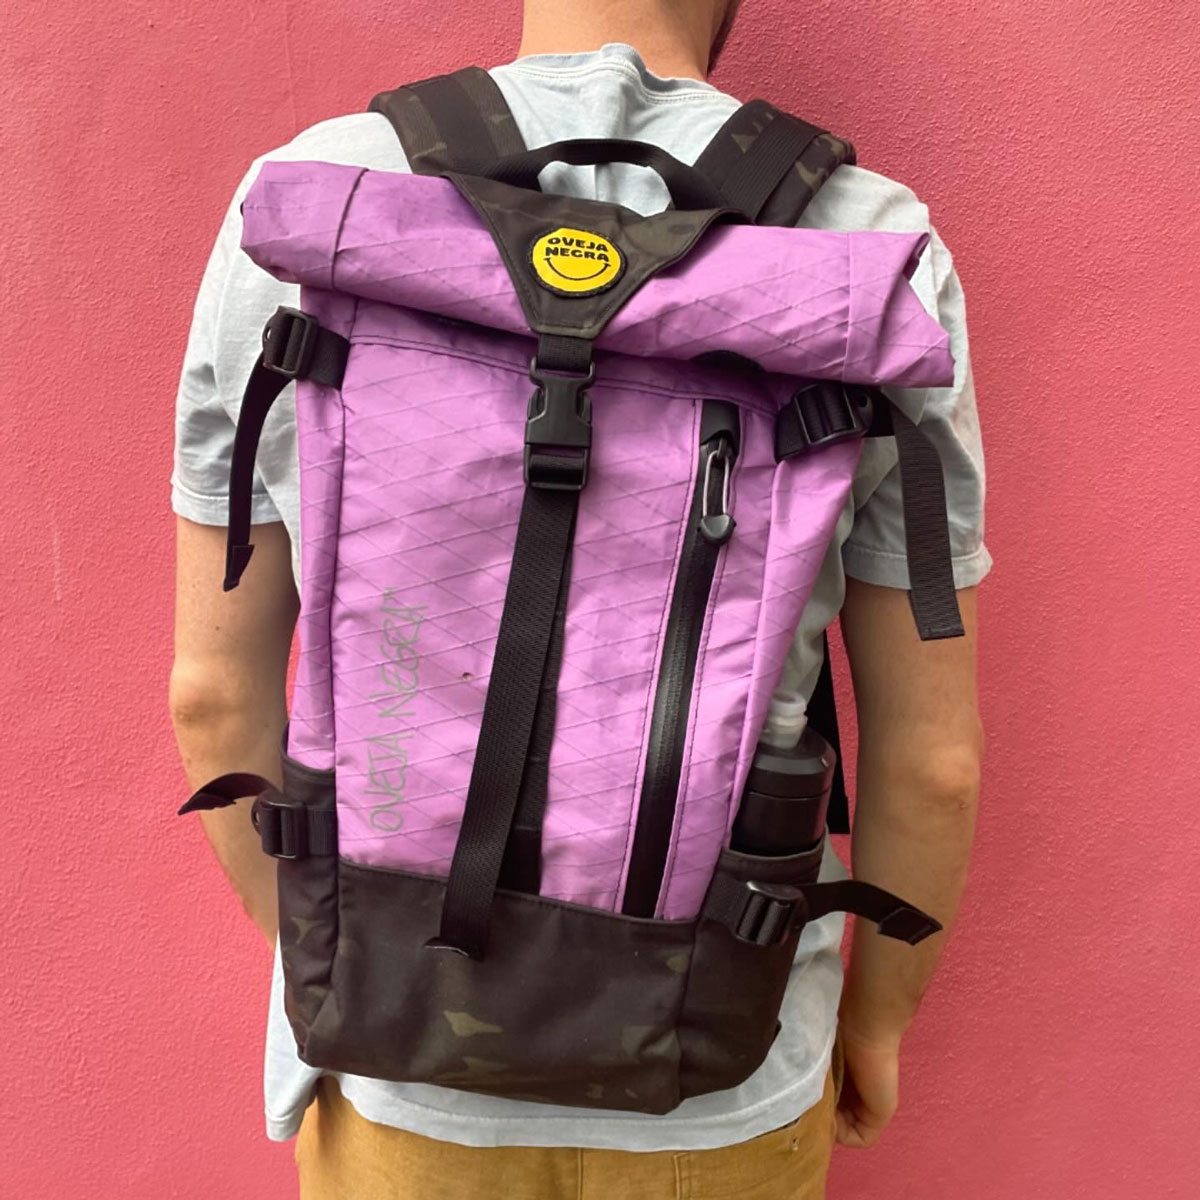 A person wearing the Oveja Negra Portero Backpack, standing confidently in an urban setting, showcasing the backpack's stylish design and functional features.